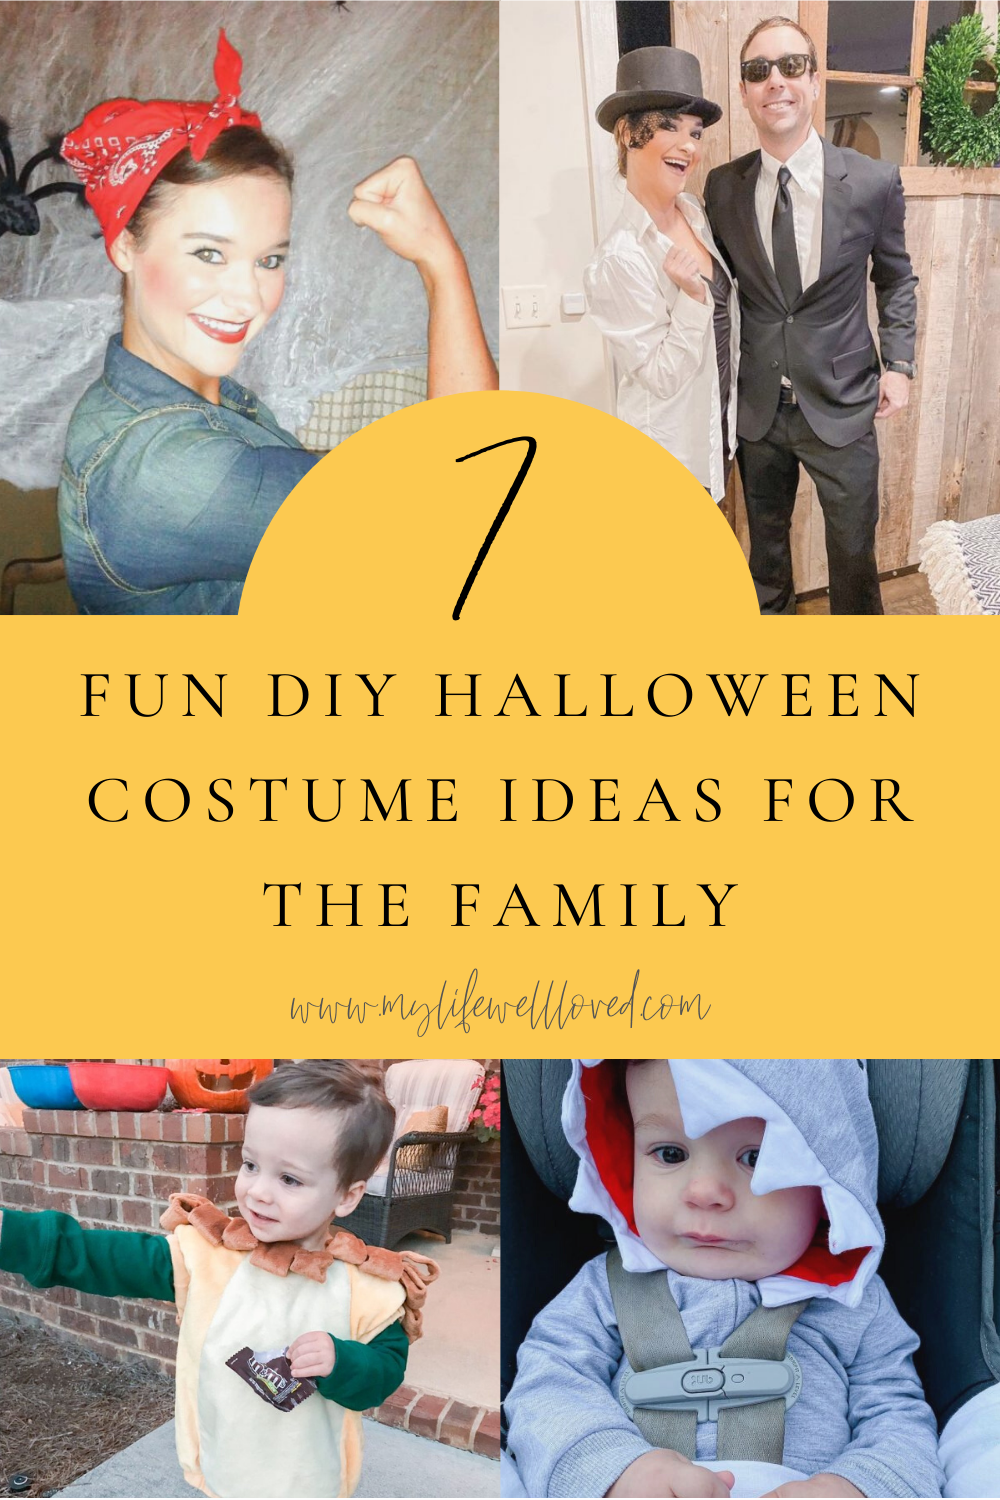 10+ DIY Halloween Costume Ideas For Kids and Adults